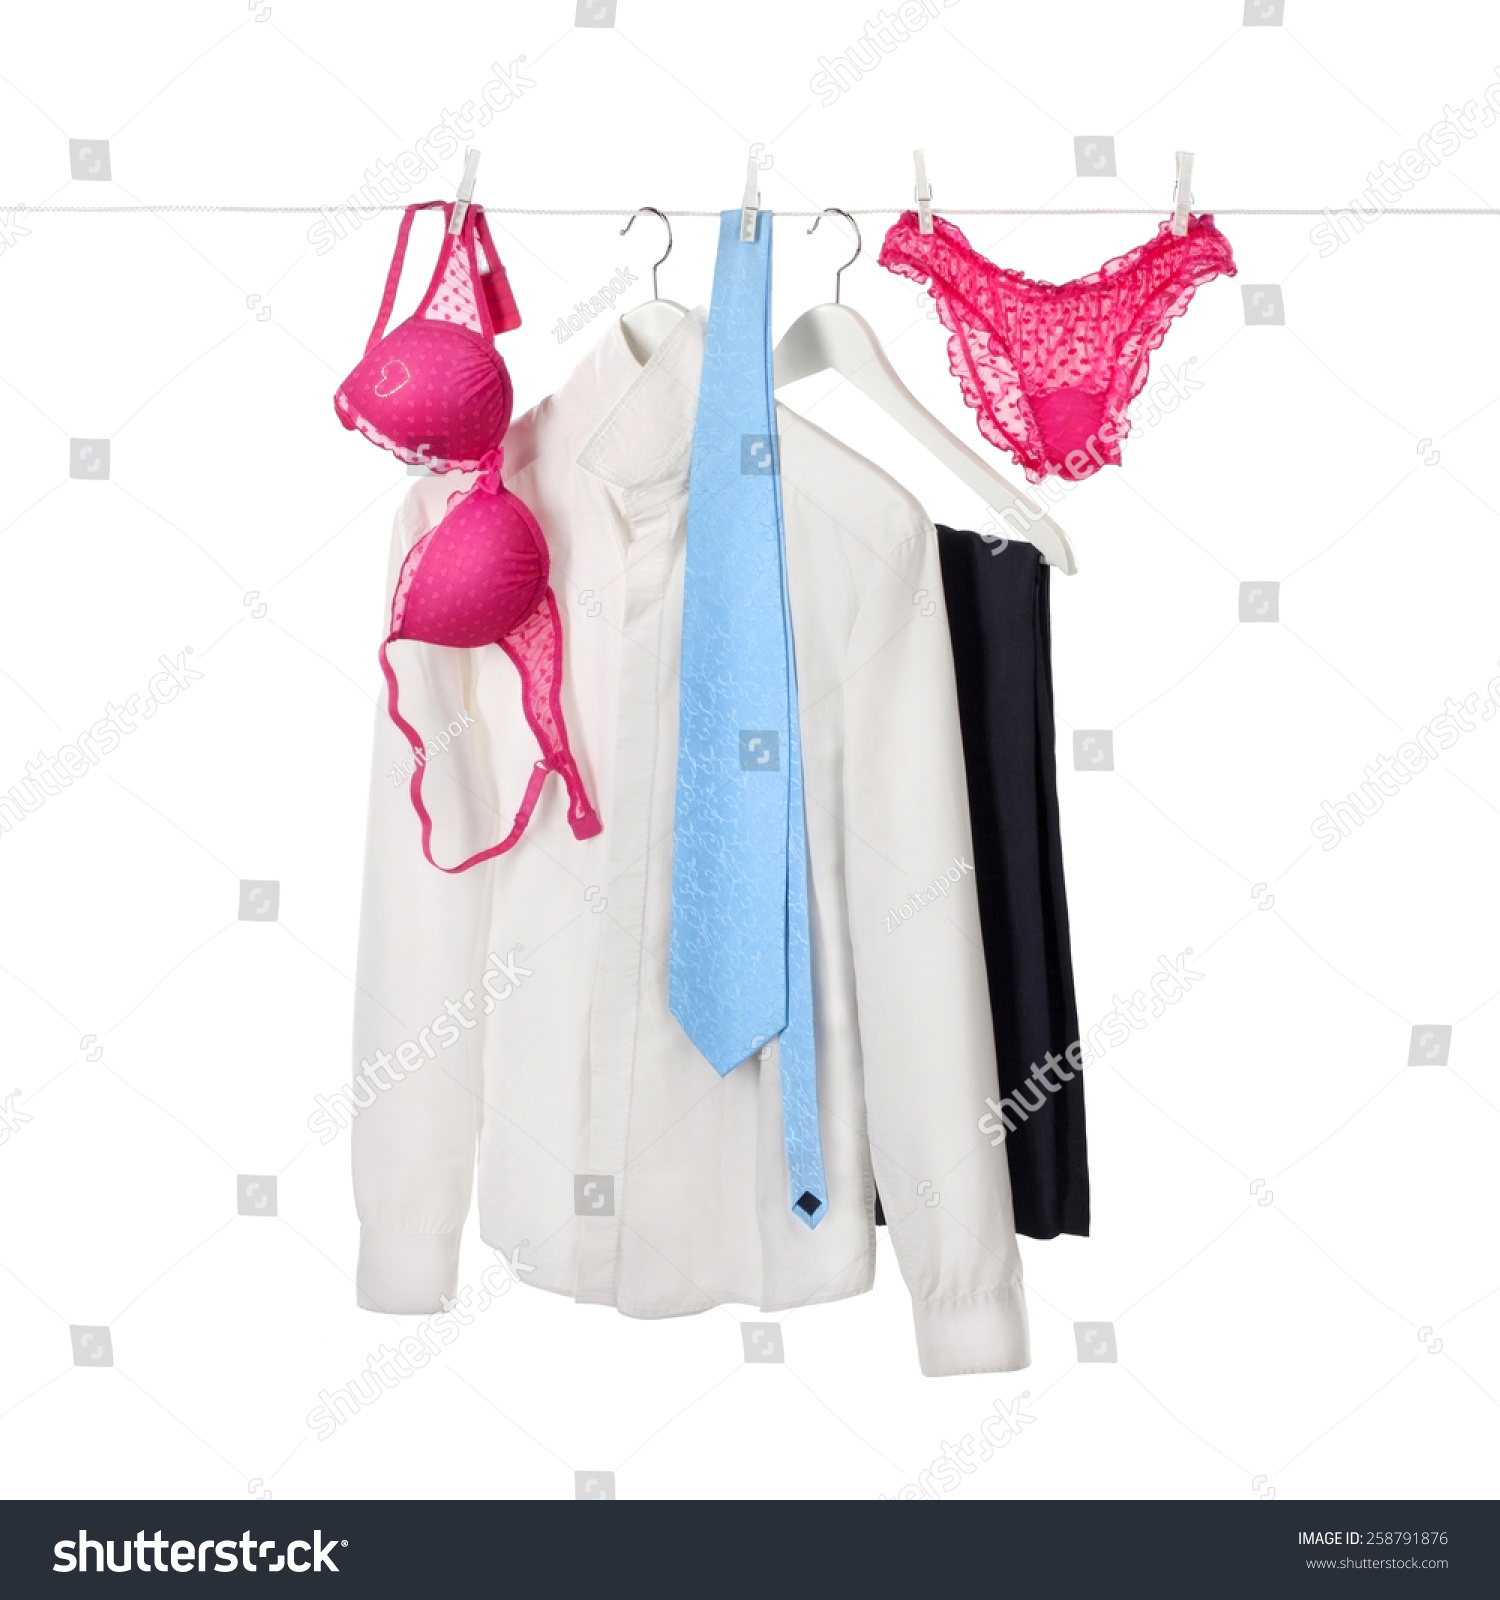 Men Women Clothes Hanging On Rope Stock Photo 258791876 - Shutterstock